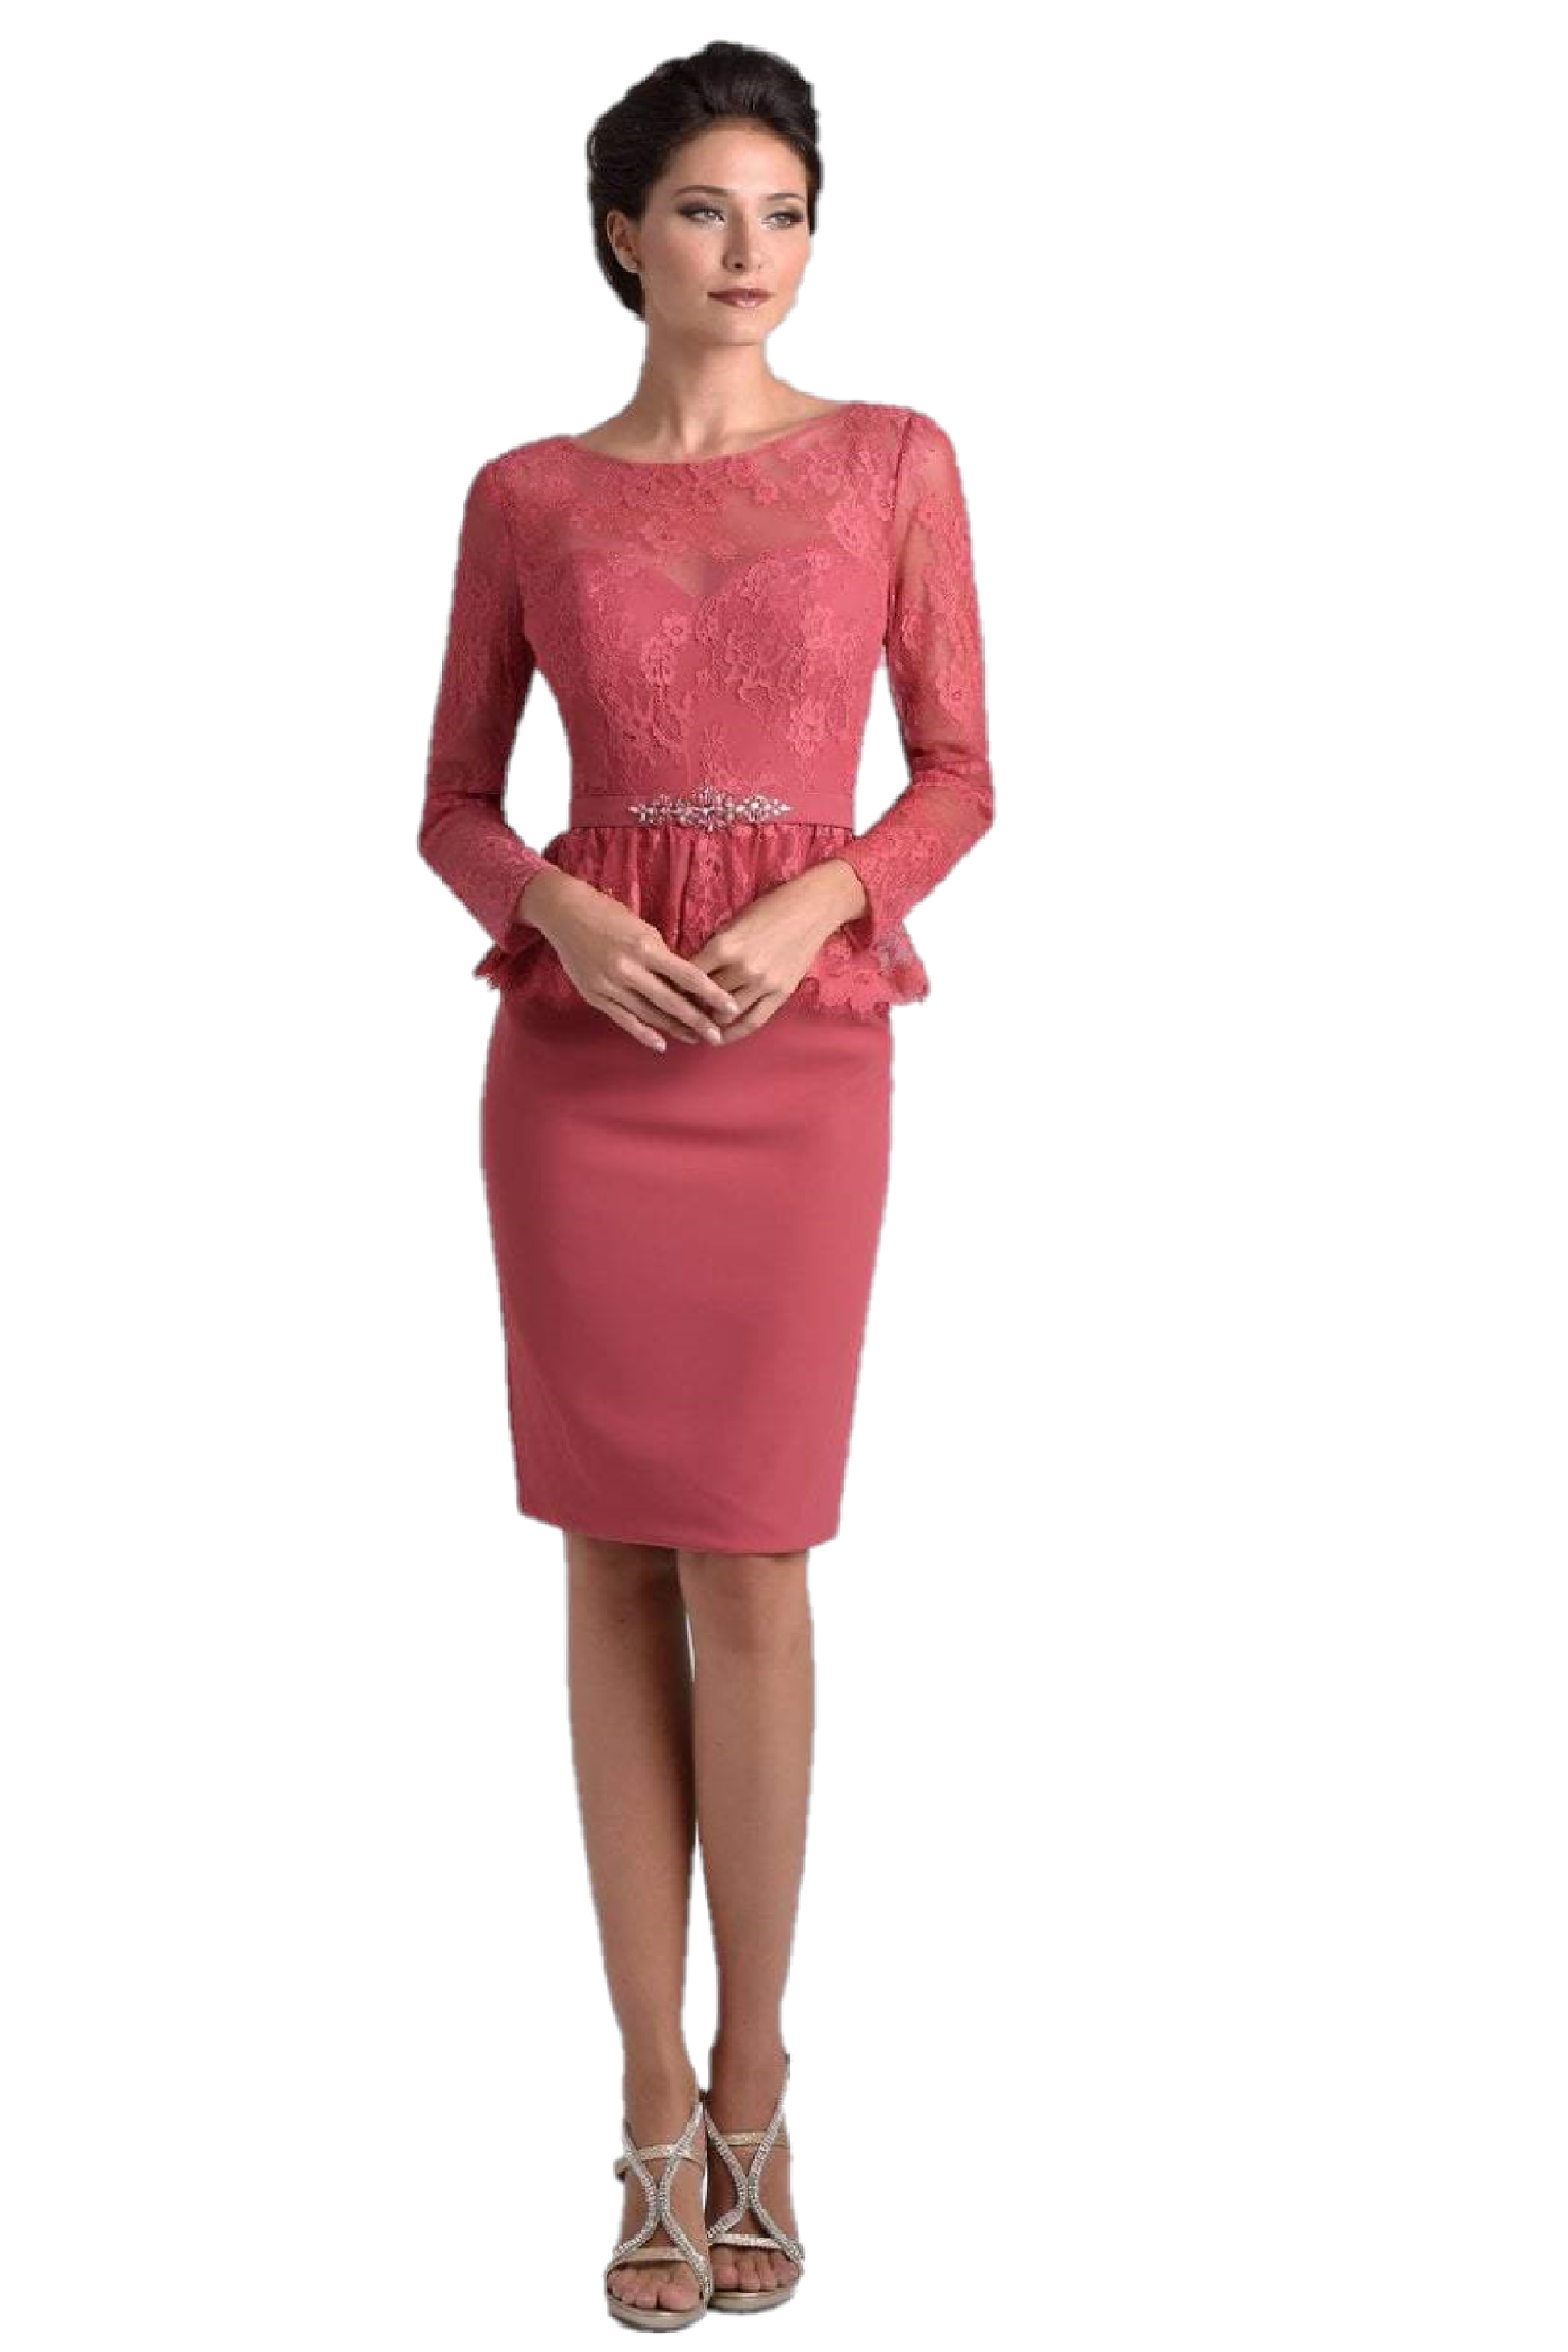 Nina Canacci M221 is a stunning short pencil skirt knee length cocktail dress. featuring a sheer lace illusion high boat neckline with 3/4 long lace sleeves. three-quarter sleeves, paired with a keyhole back accented with a peplum beaded waist. Eyelash lace hem ruffle around the waist to flatter any figure! Available Sizes: 6, 8, 10  Available Colors: Dark Rose